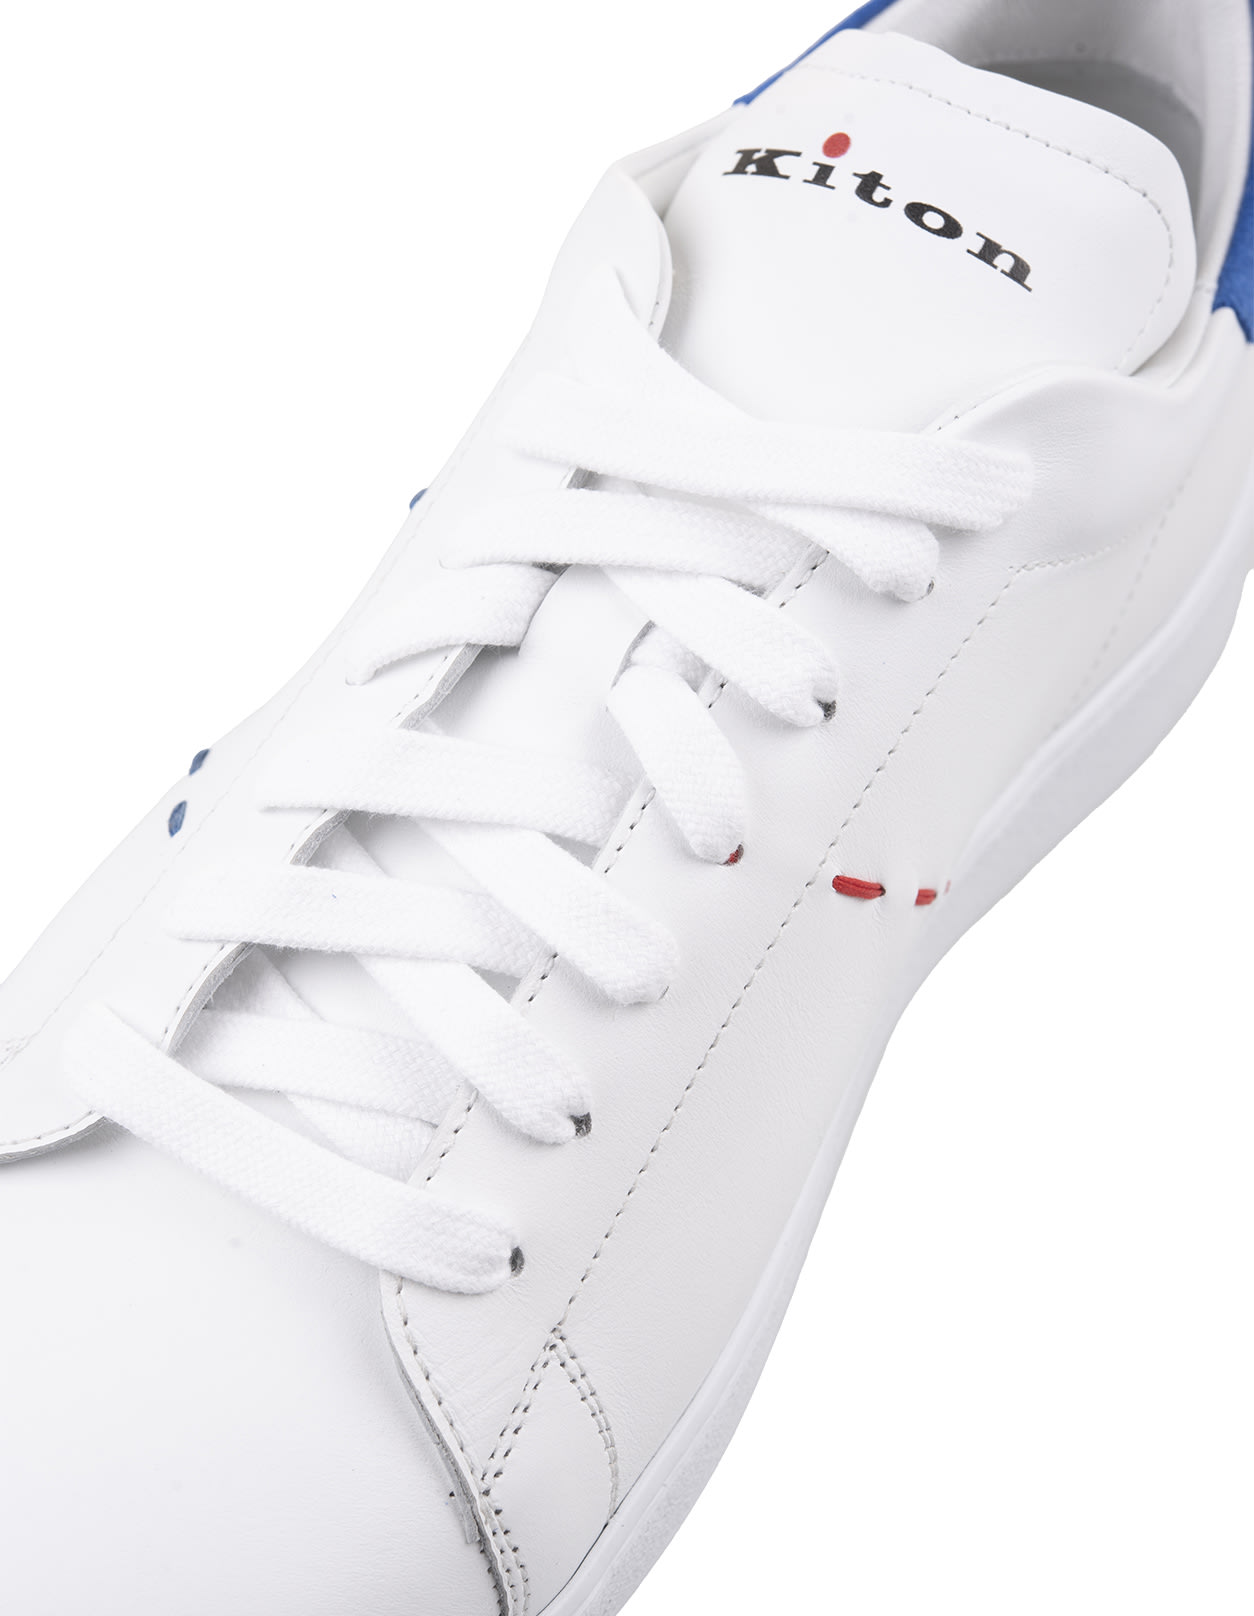 Shop Kiton White Leather Sneakers With Blue Details